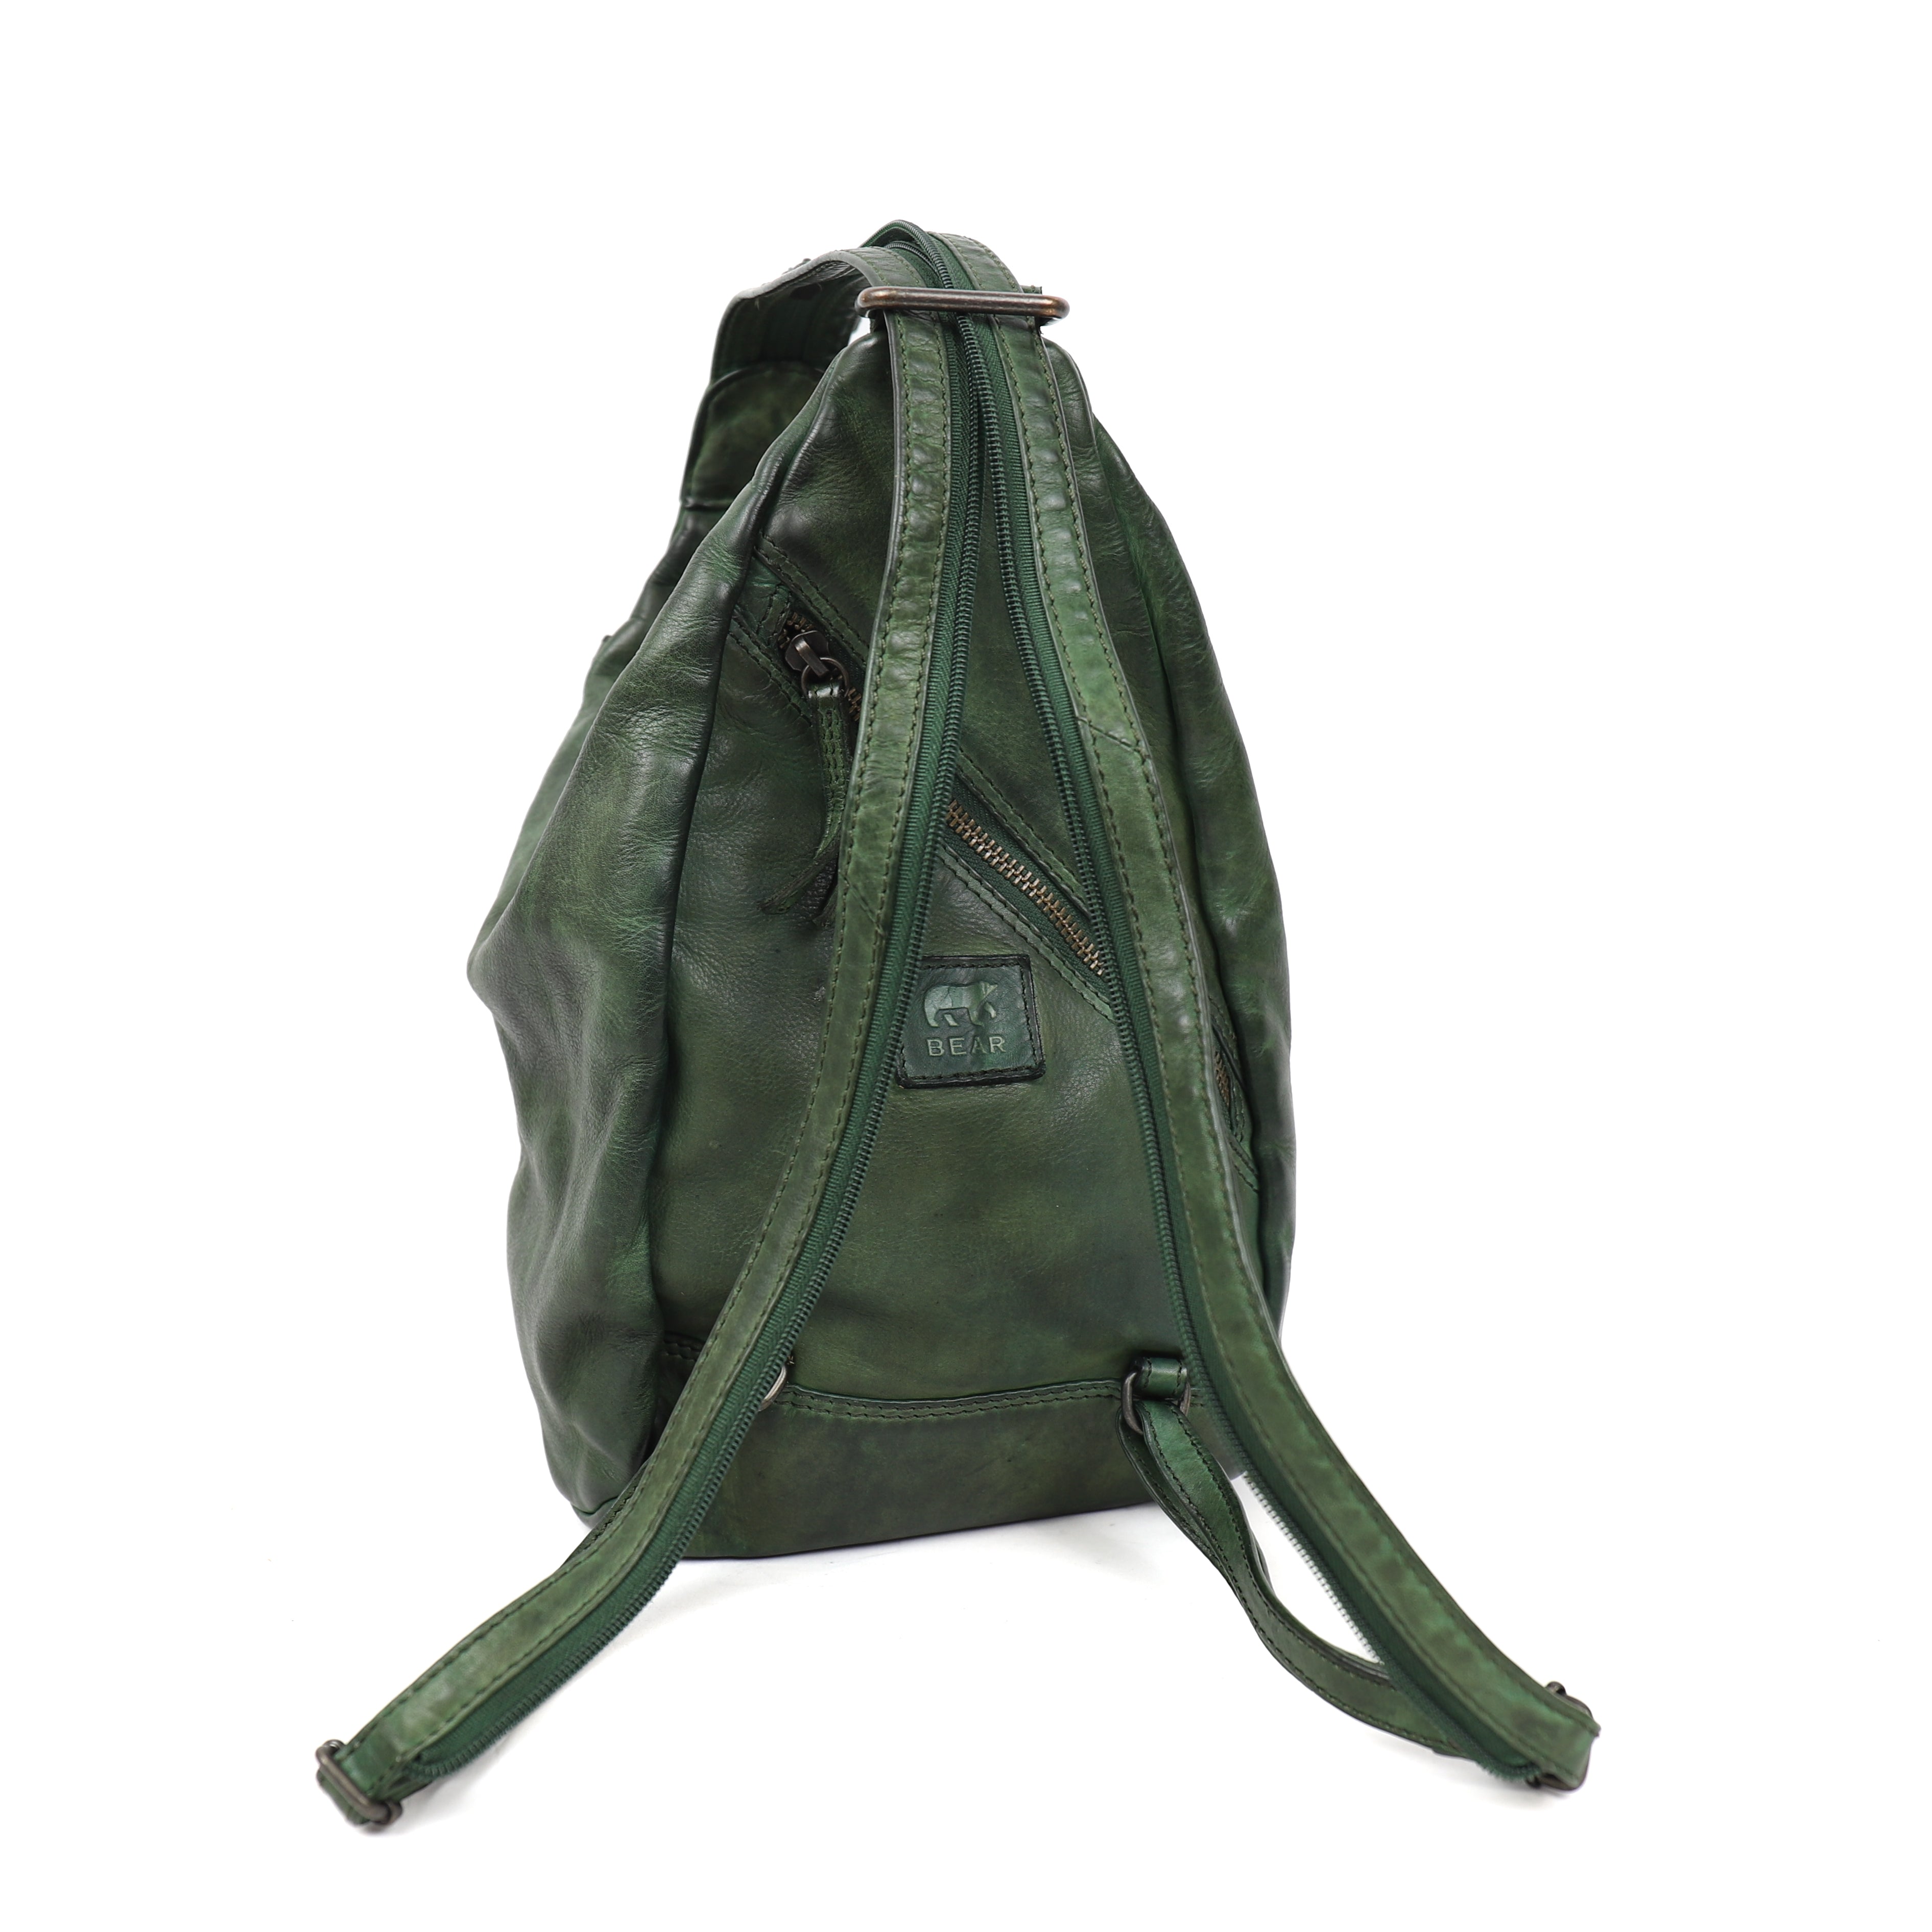 Backpack 'Hannie' green - CL 36137